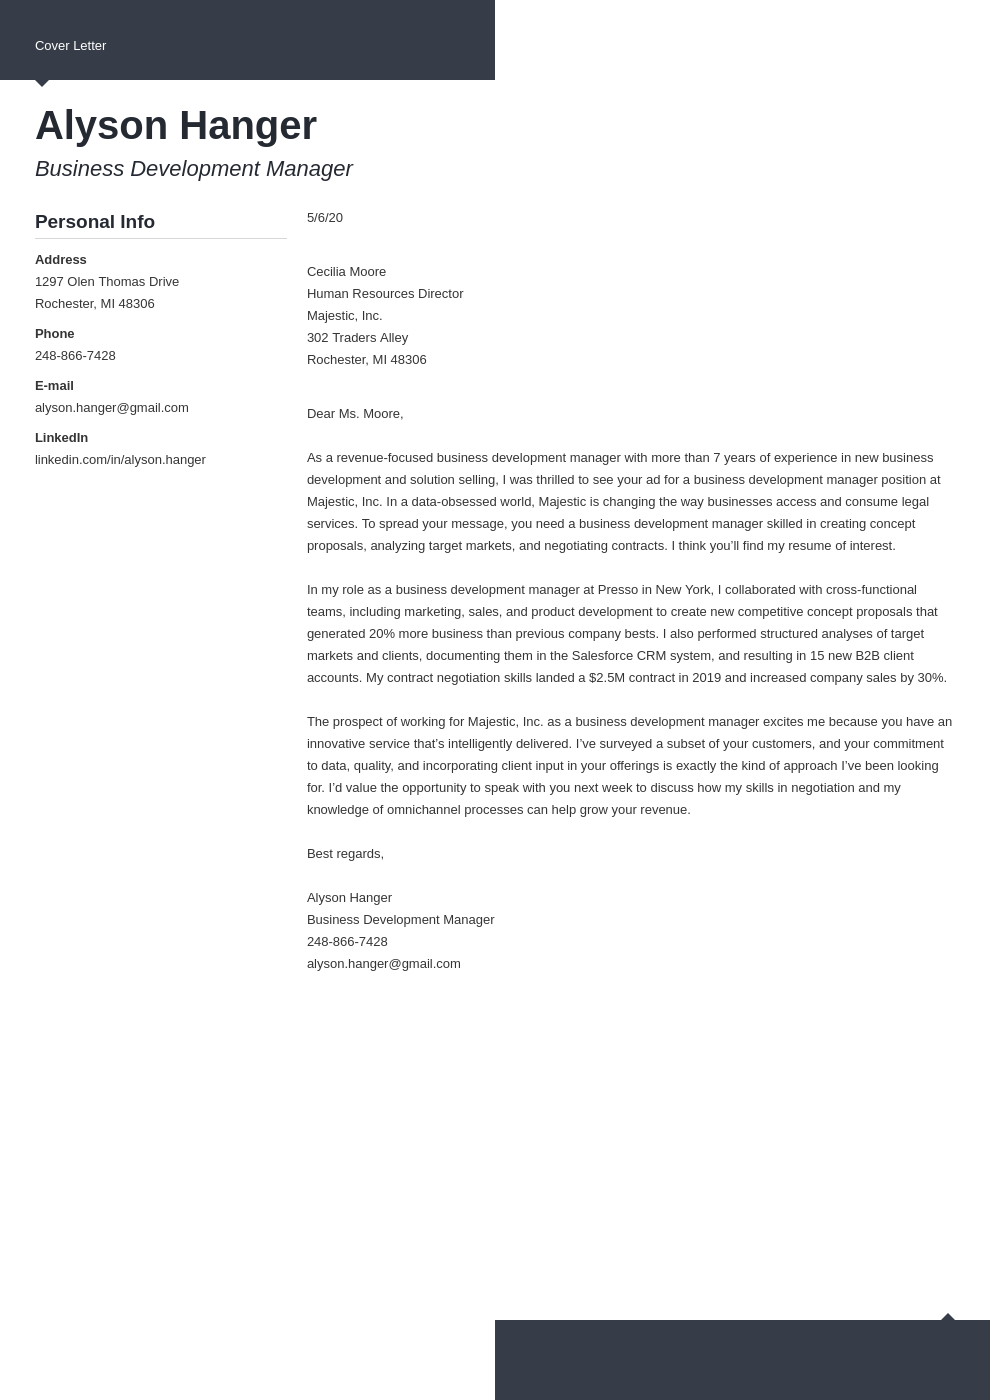 research and development manager cover letter